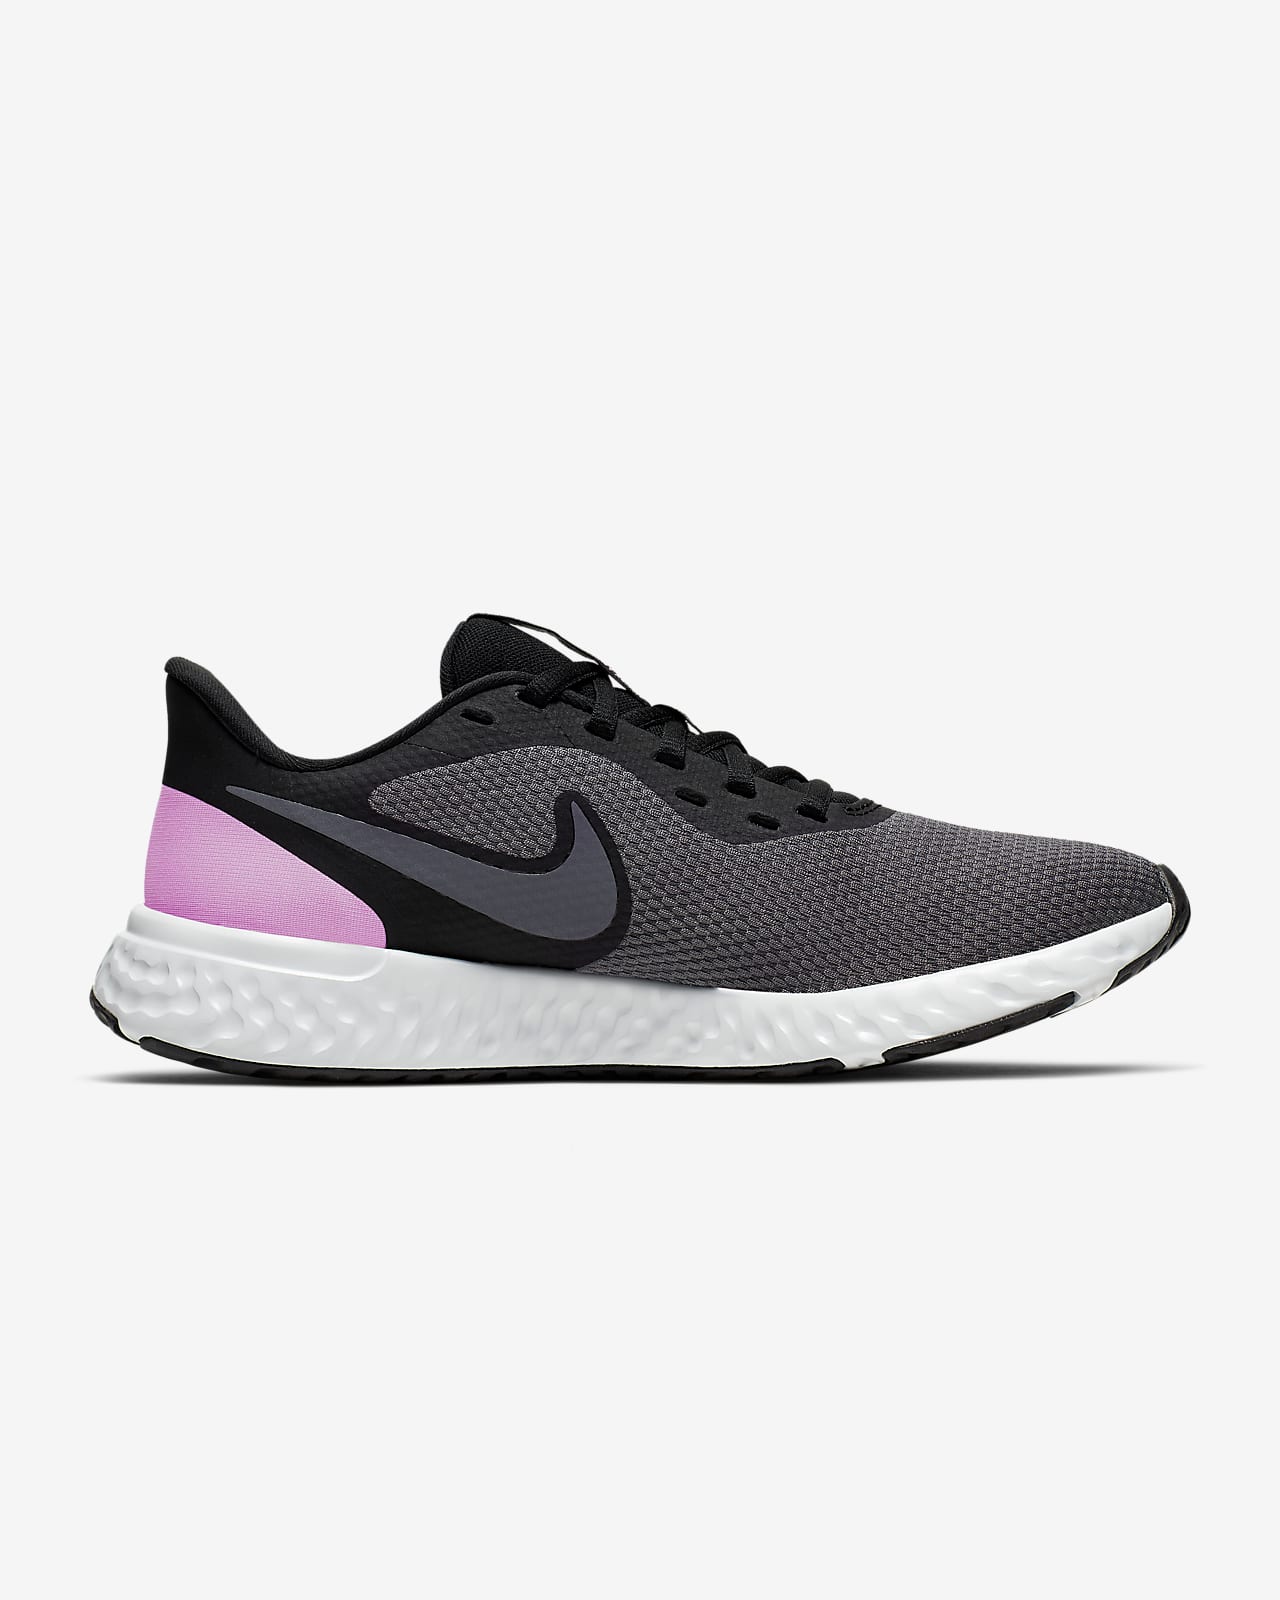 nike womens running shoes pink and black